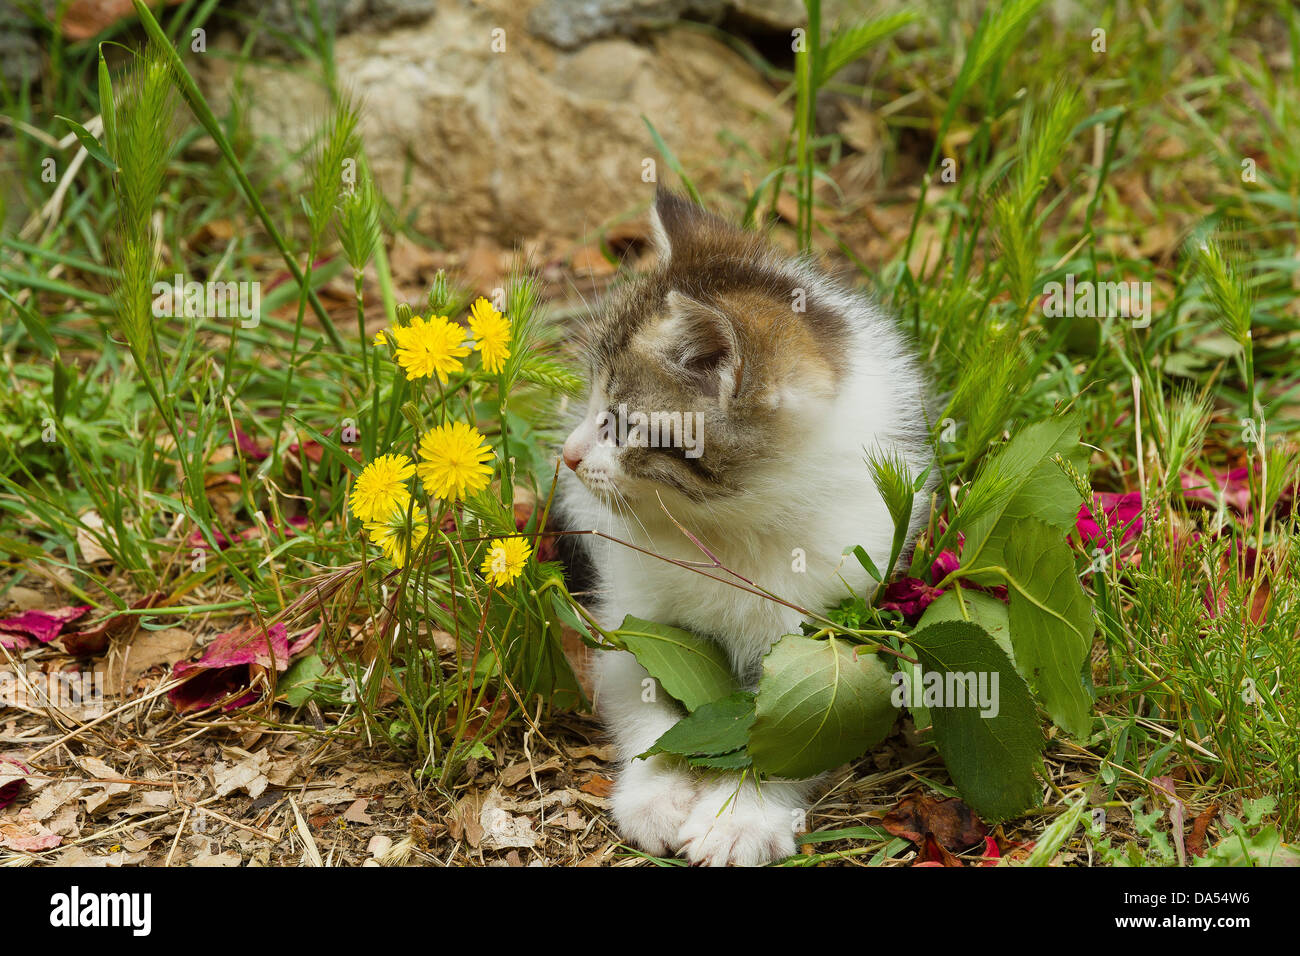 Animal, chat, chaton, jeune, jardin, animal domestique, animal, meadow Banque D'Images